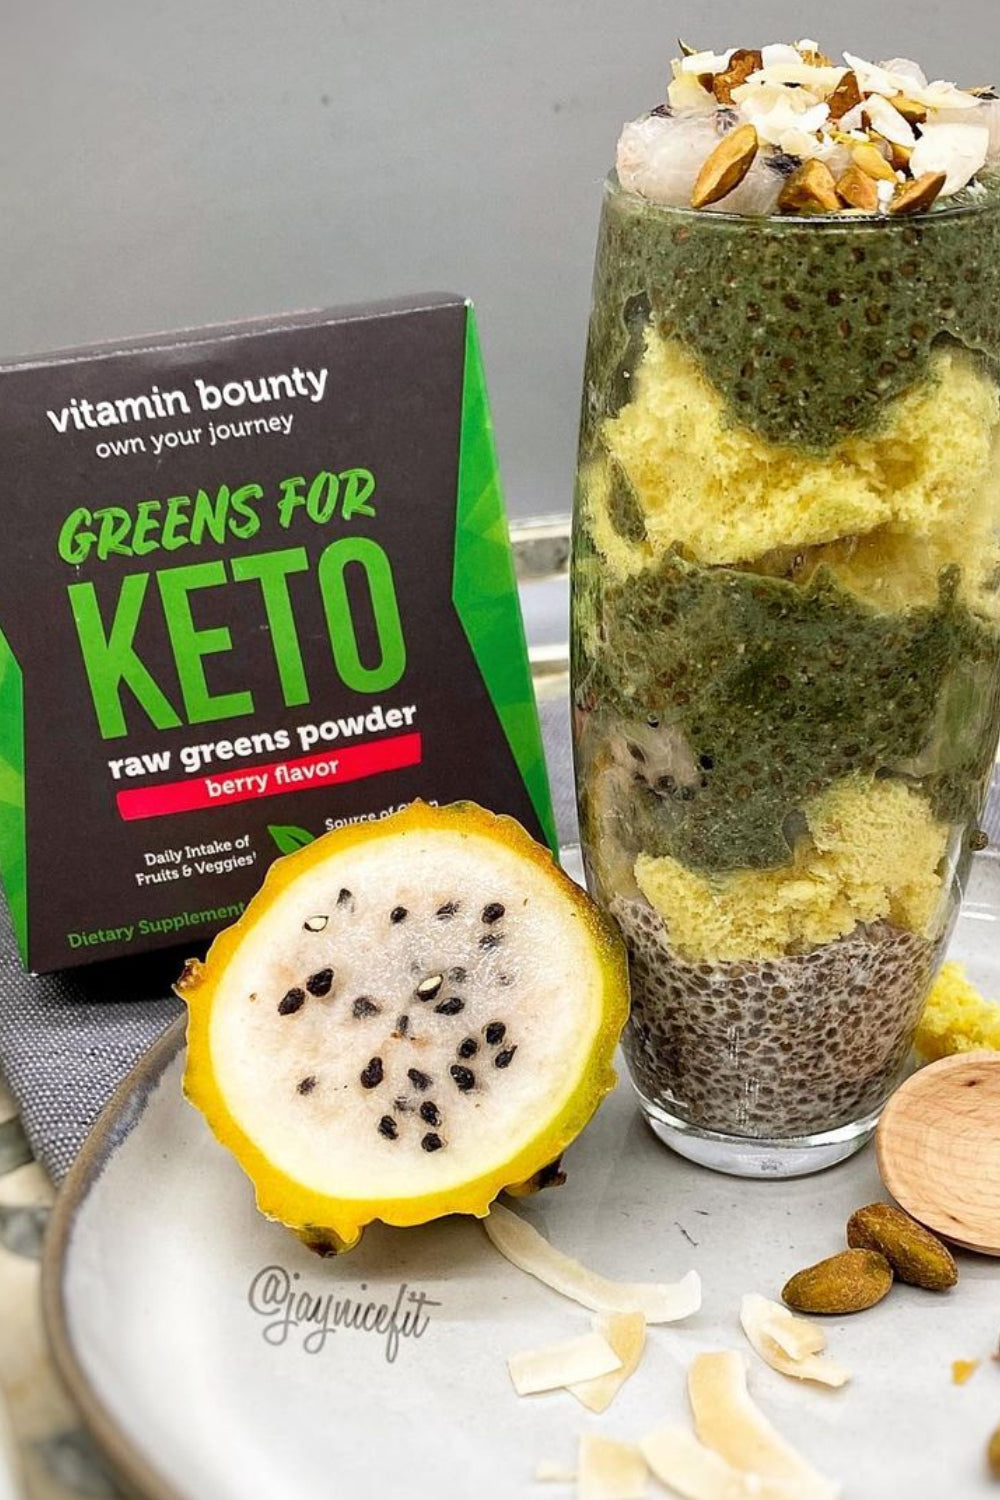 Chia Pudding Parfait layered in a glass, with dragon fruit made with Green's for Keto by Vitamin Bounty